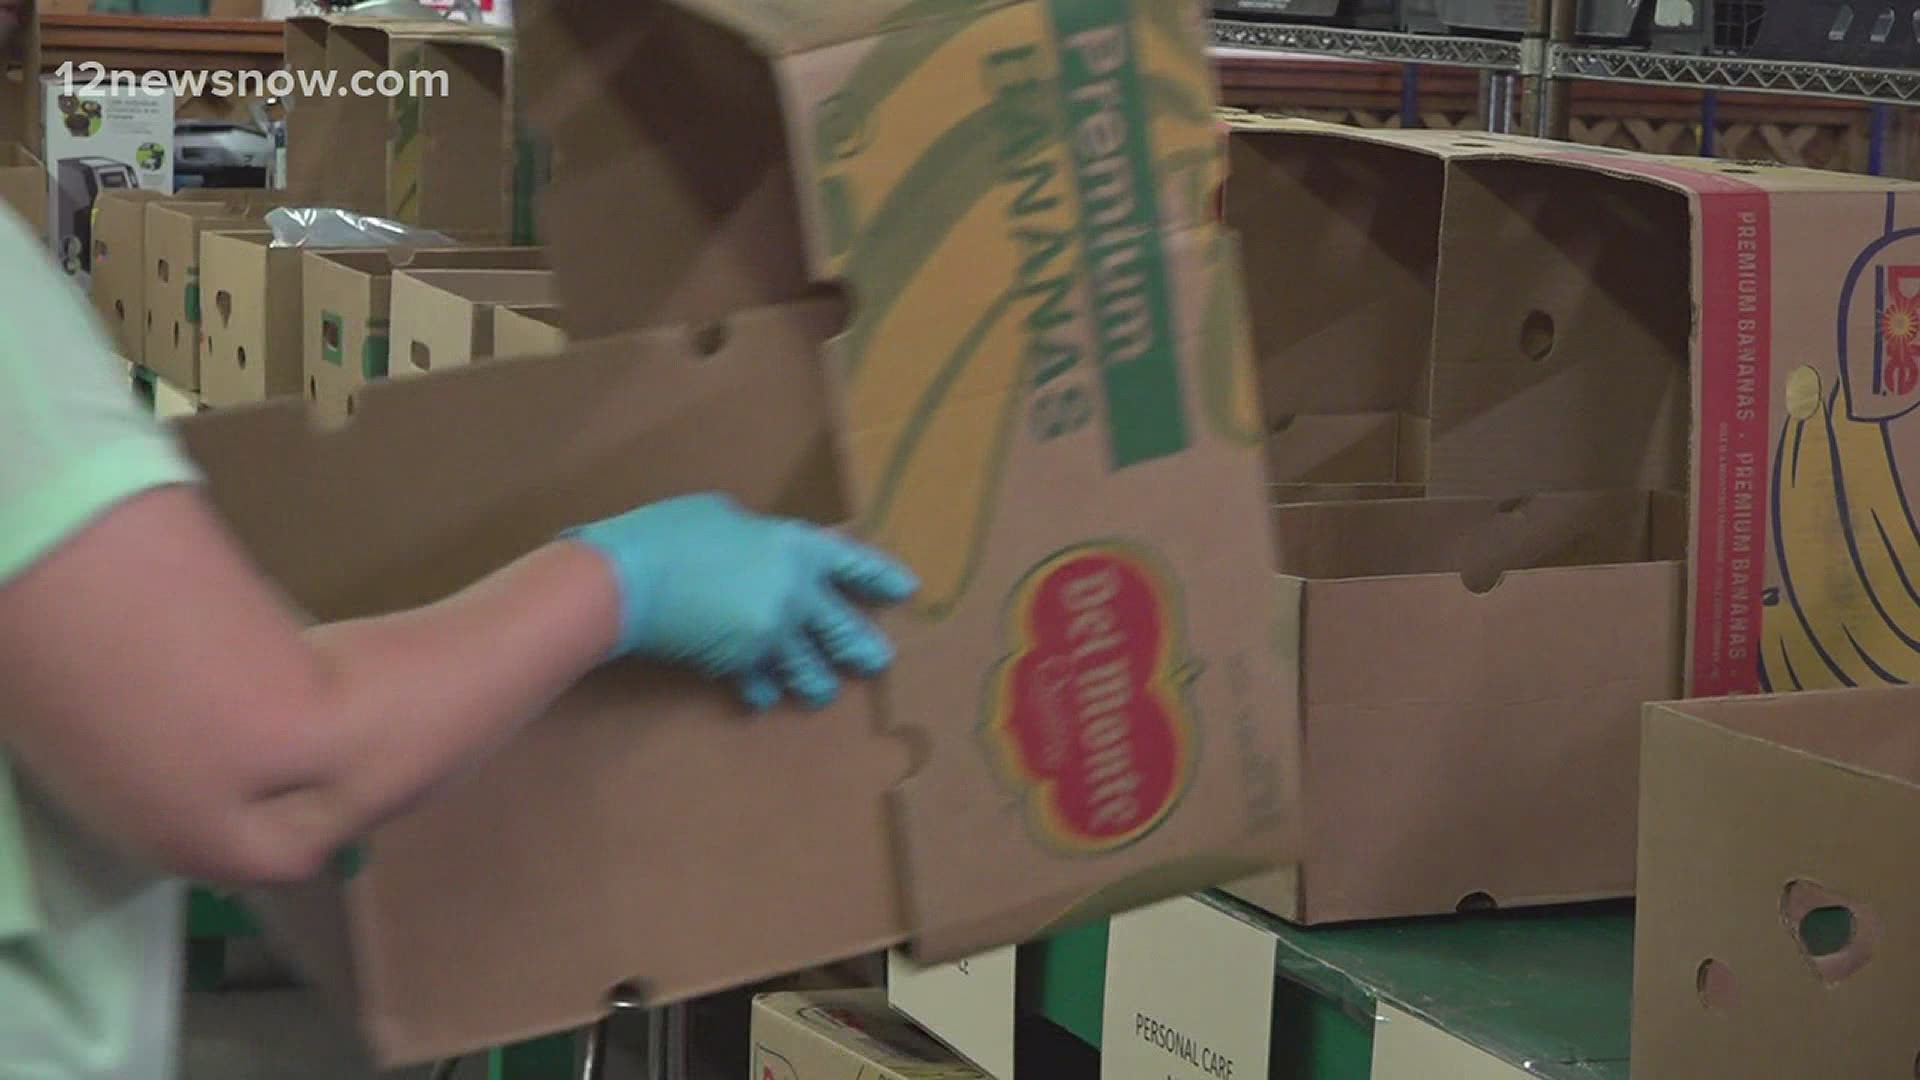 The programs in jeopardy are helping food banks to assist families suffering from the COVID-19 pandemic